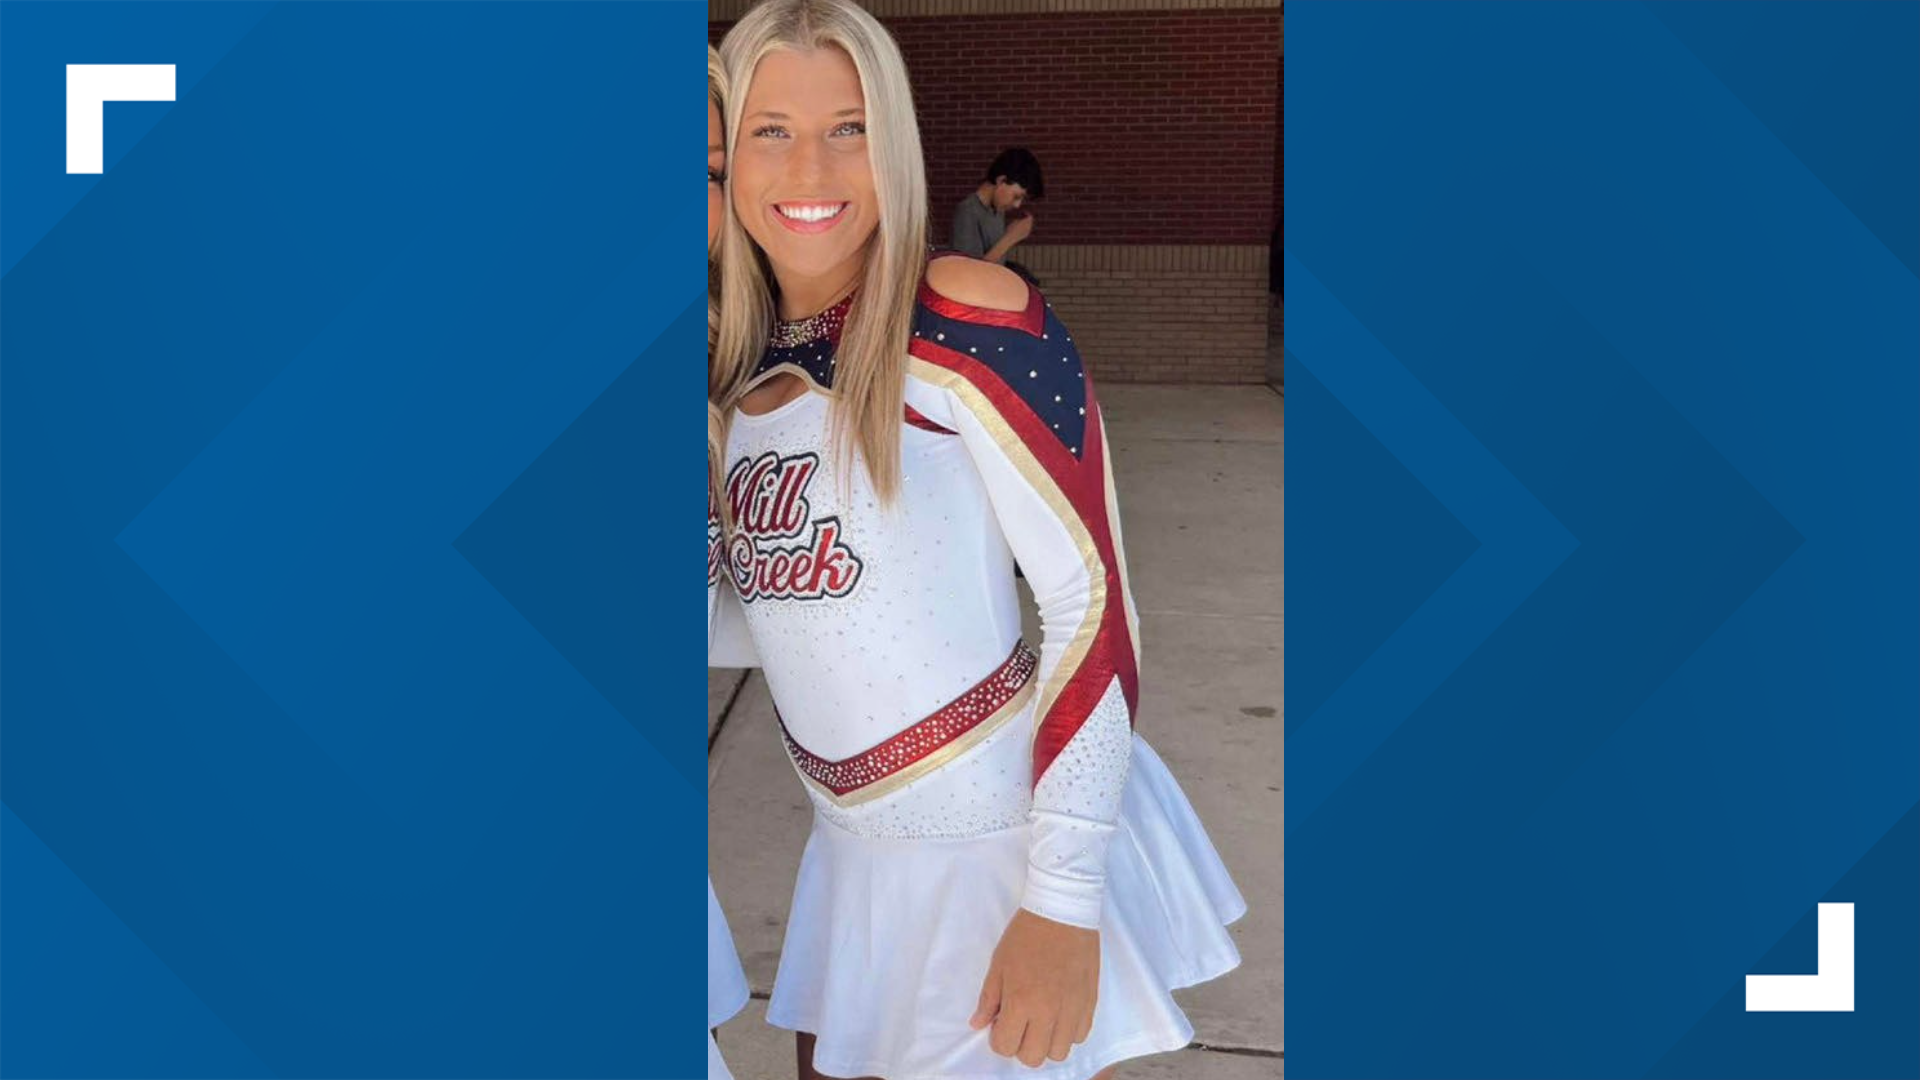 The cheer team identified the student as Caitlyn Pollock, a junior on the team.